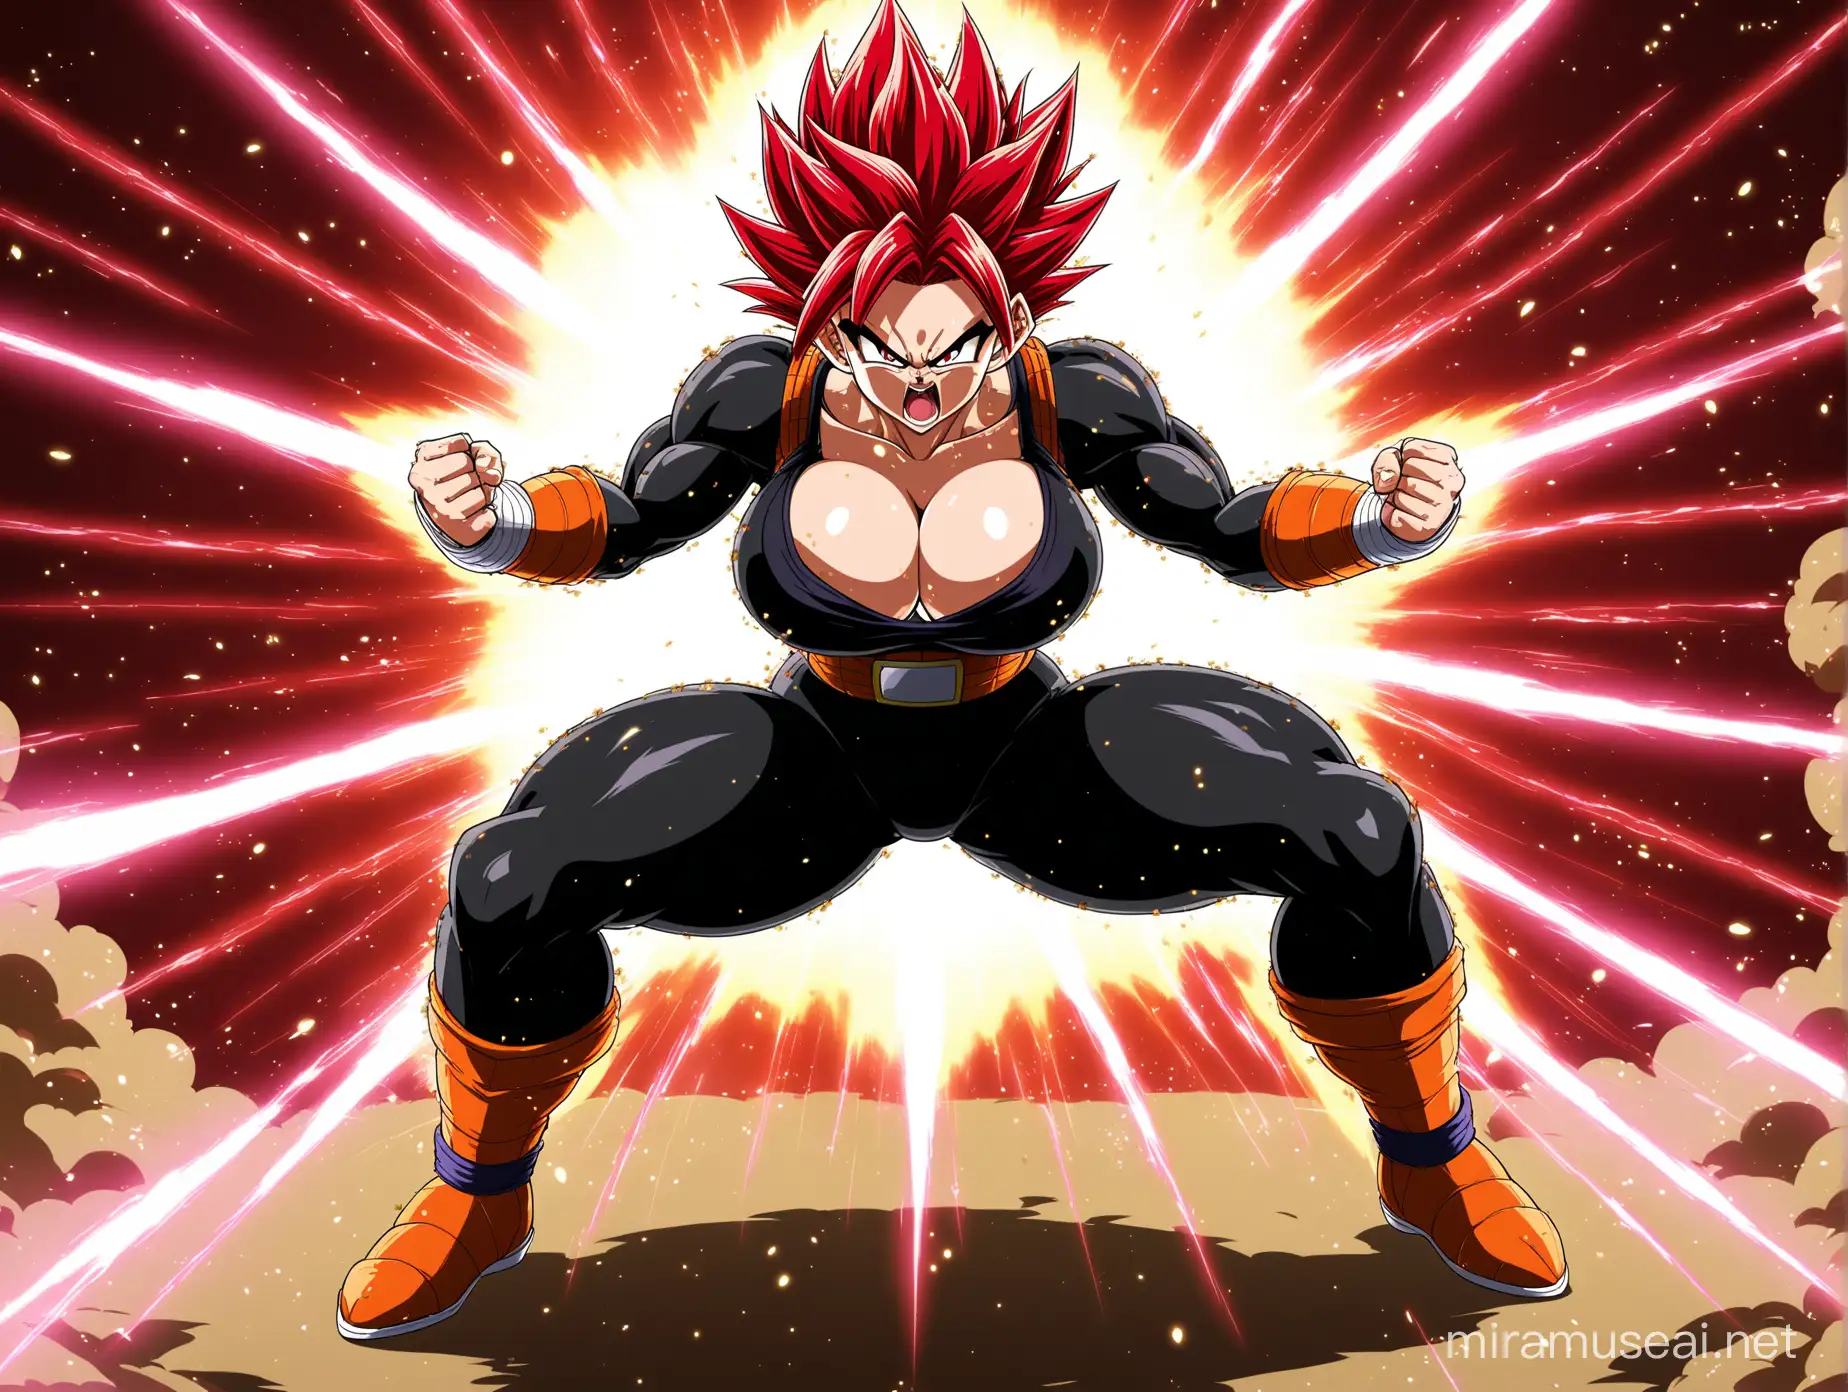 a female saiyan, black suit with red edges, angry, Red hair, Rose power aura, power particles, dragon ball z, full body, huge breasts, strong legs.